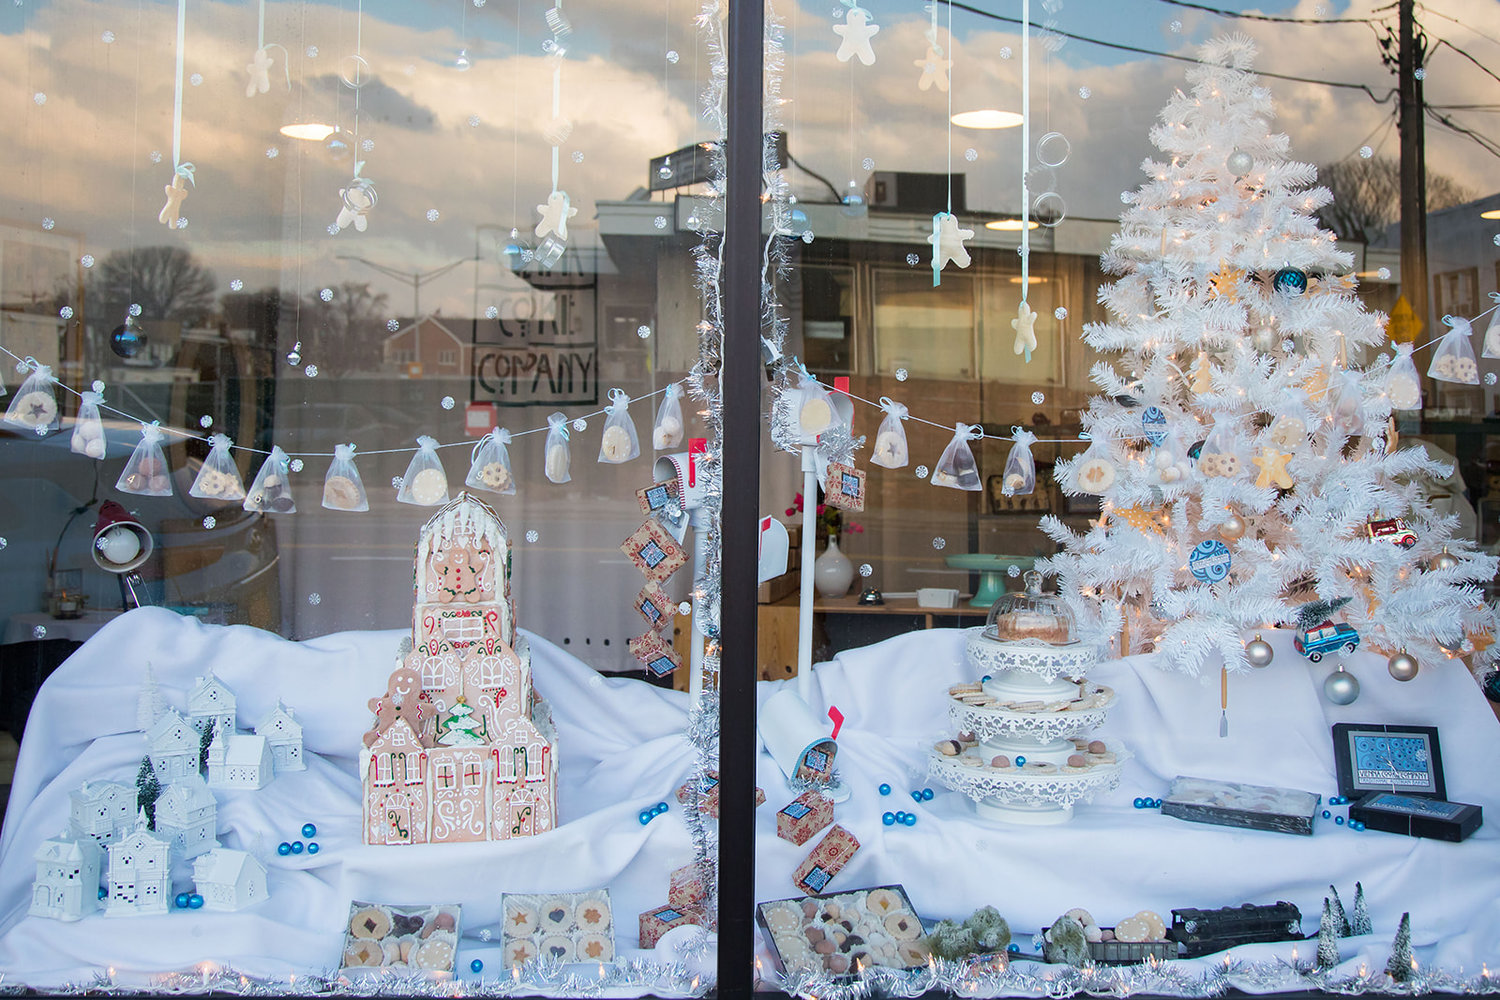 The Vienna Cookie Company in Baldwin is offering passersby the chance to win a surprise gift on Dec. 11 if they can find three hidden objects in the shop’s window display.